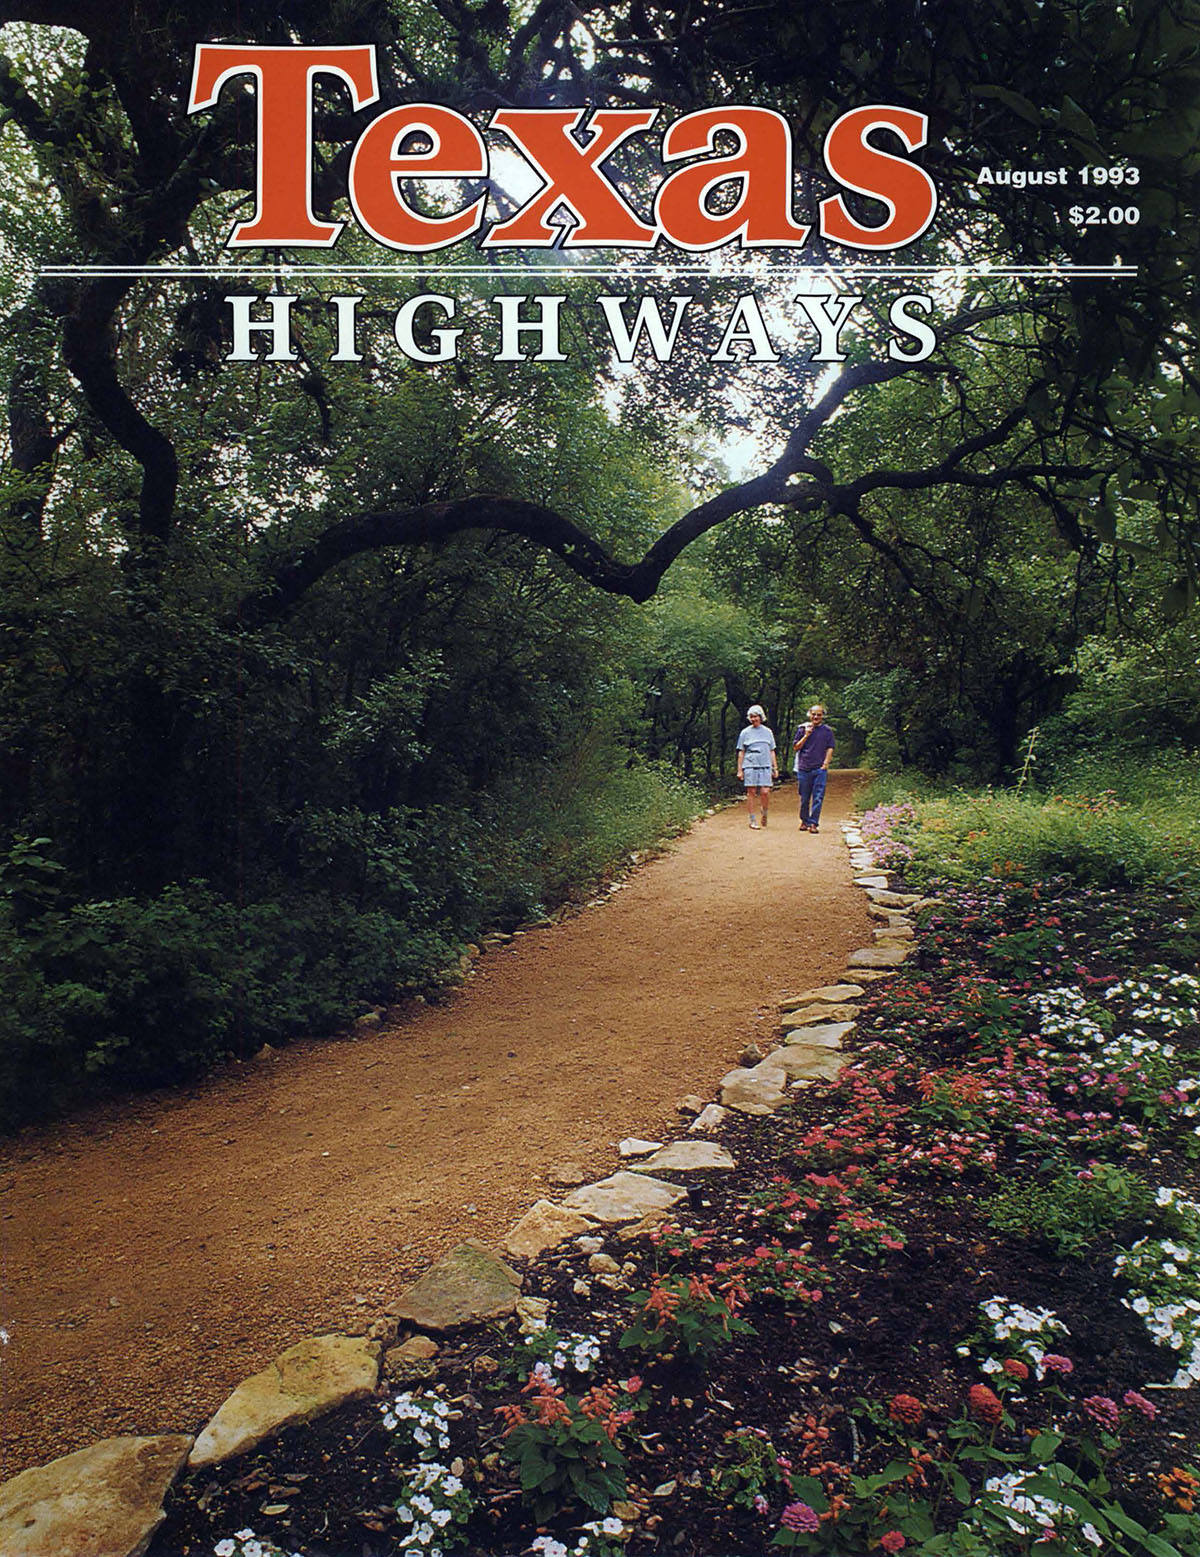 The August 1993 cover depicts two people walking down a path in a wooded scene